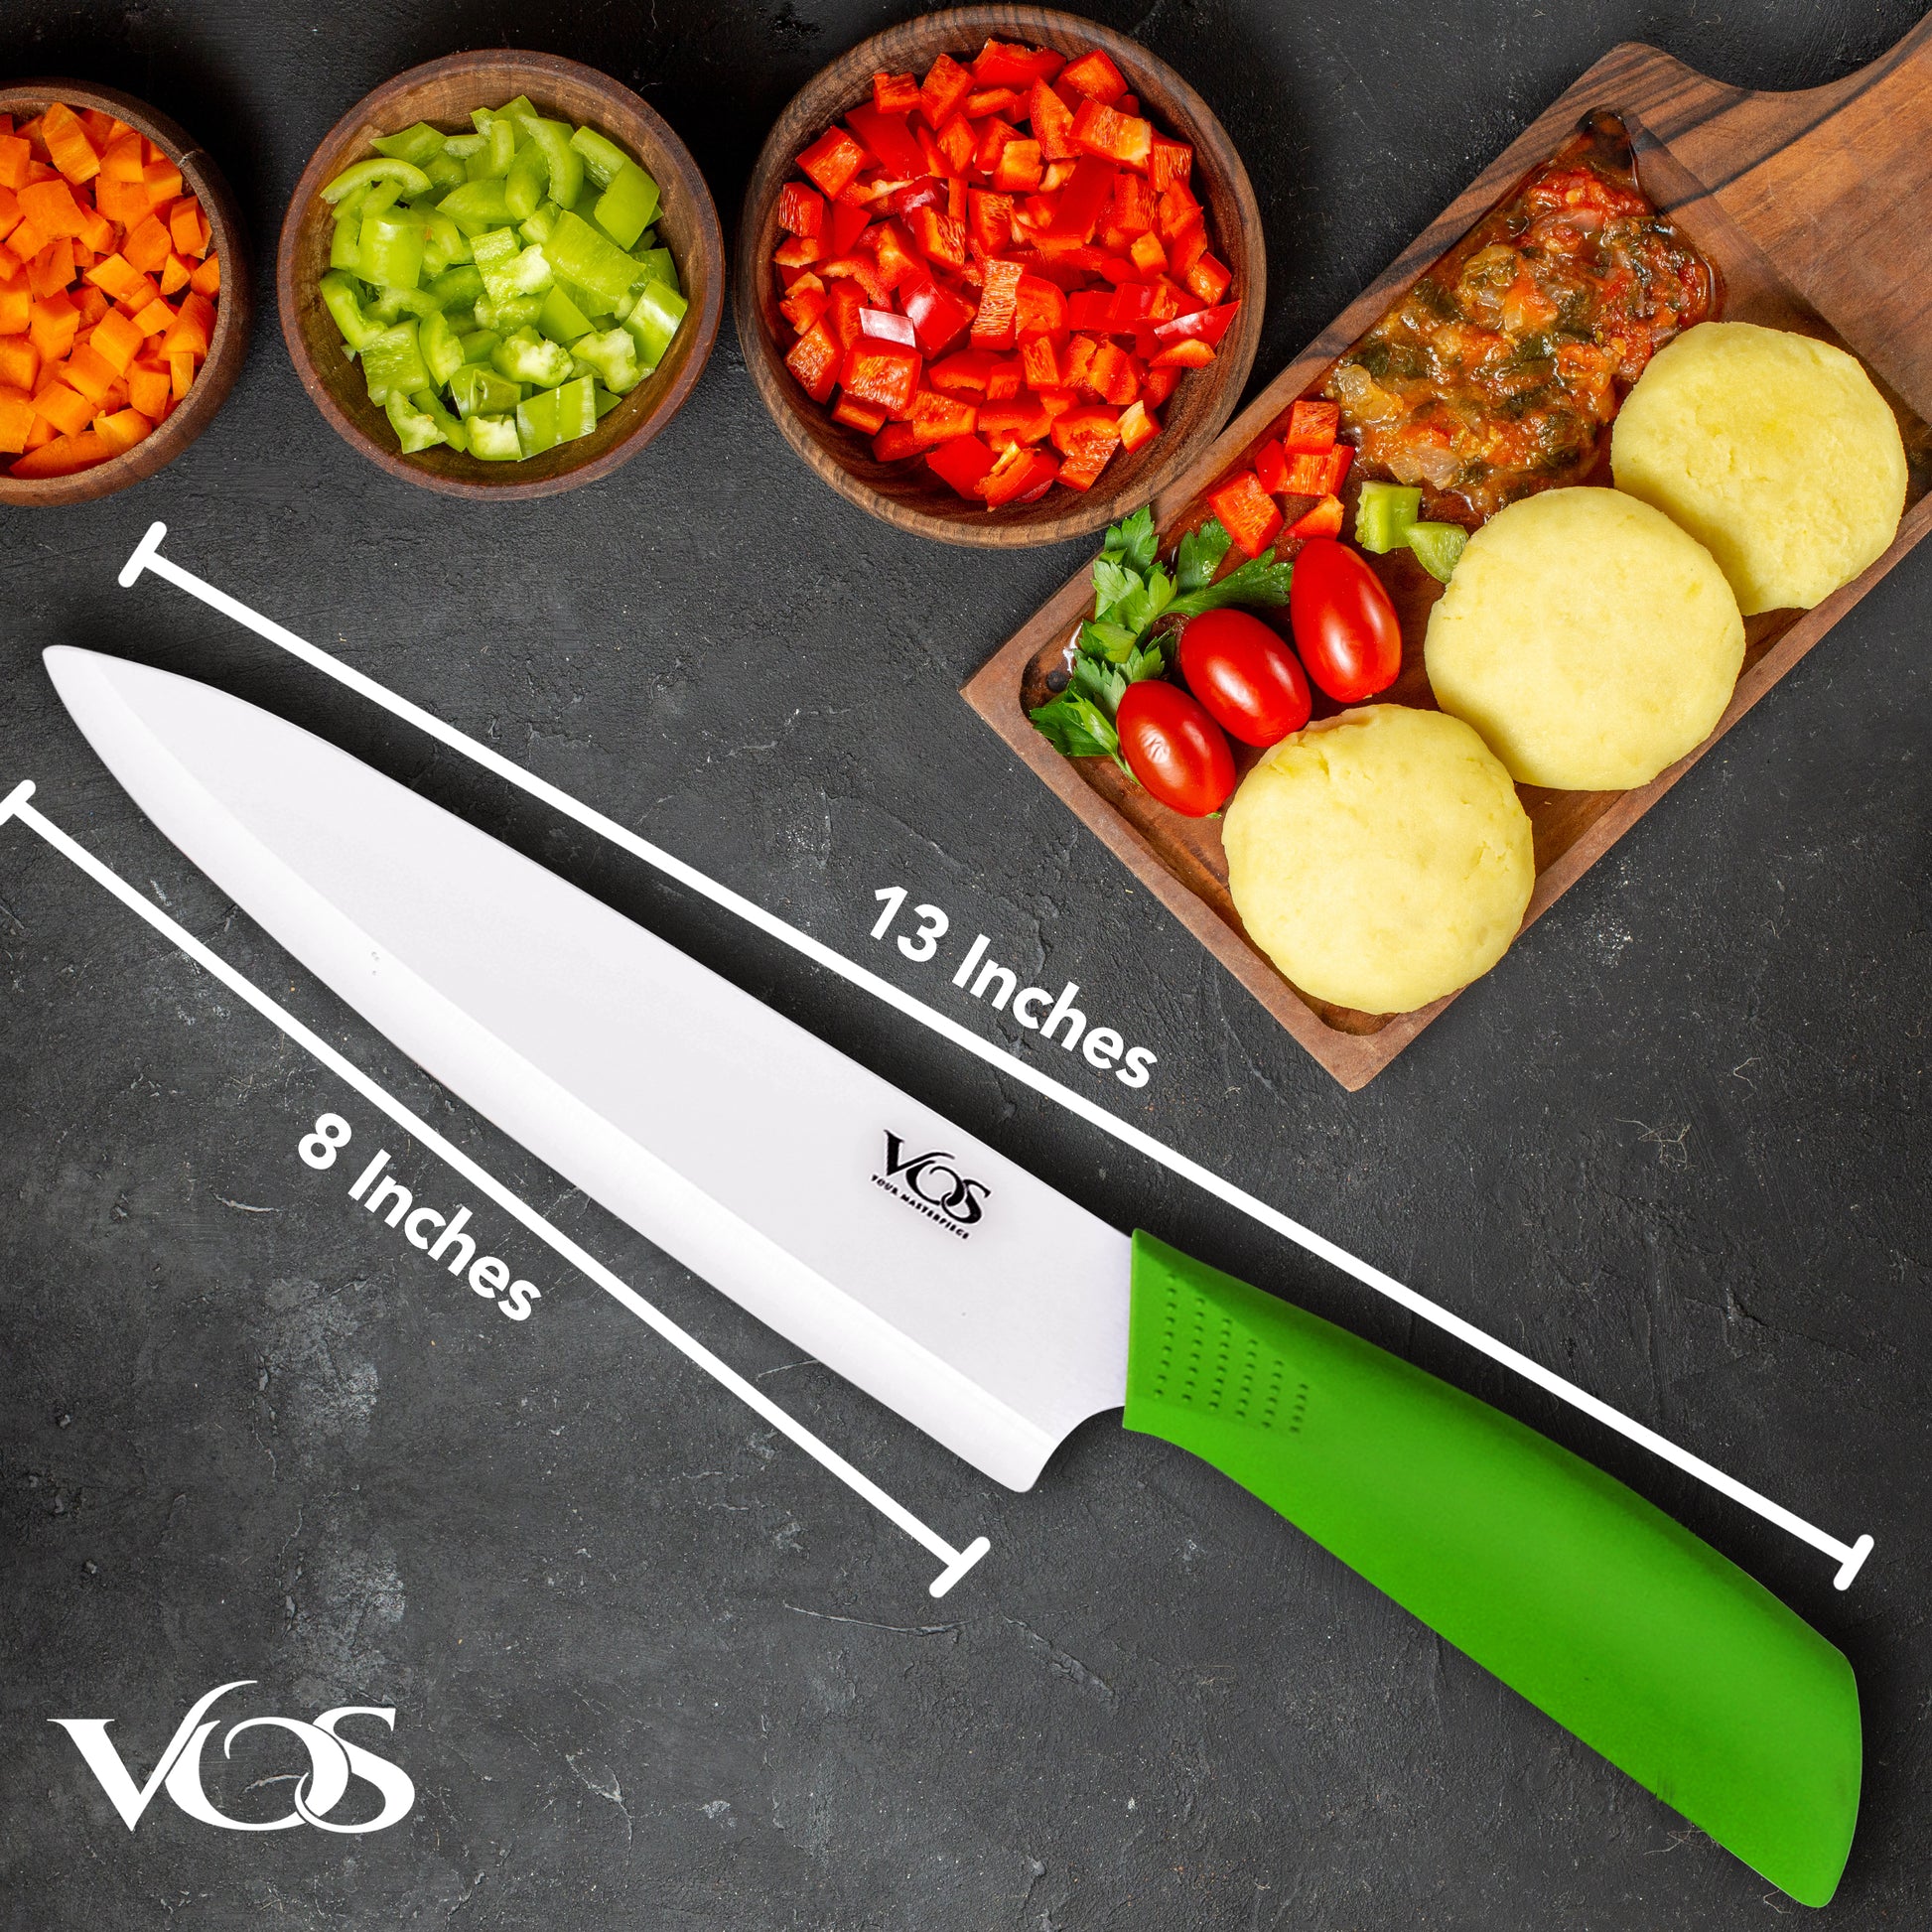 8 Inches Ceramic Knife Chef with Gift box - Green – Vosknife